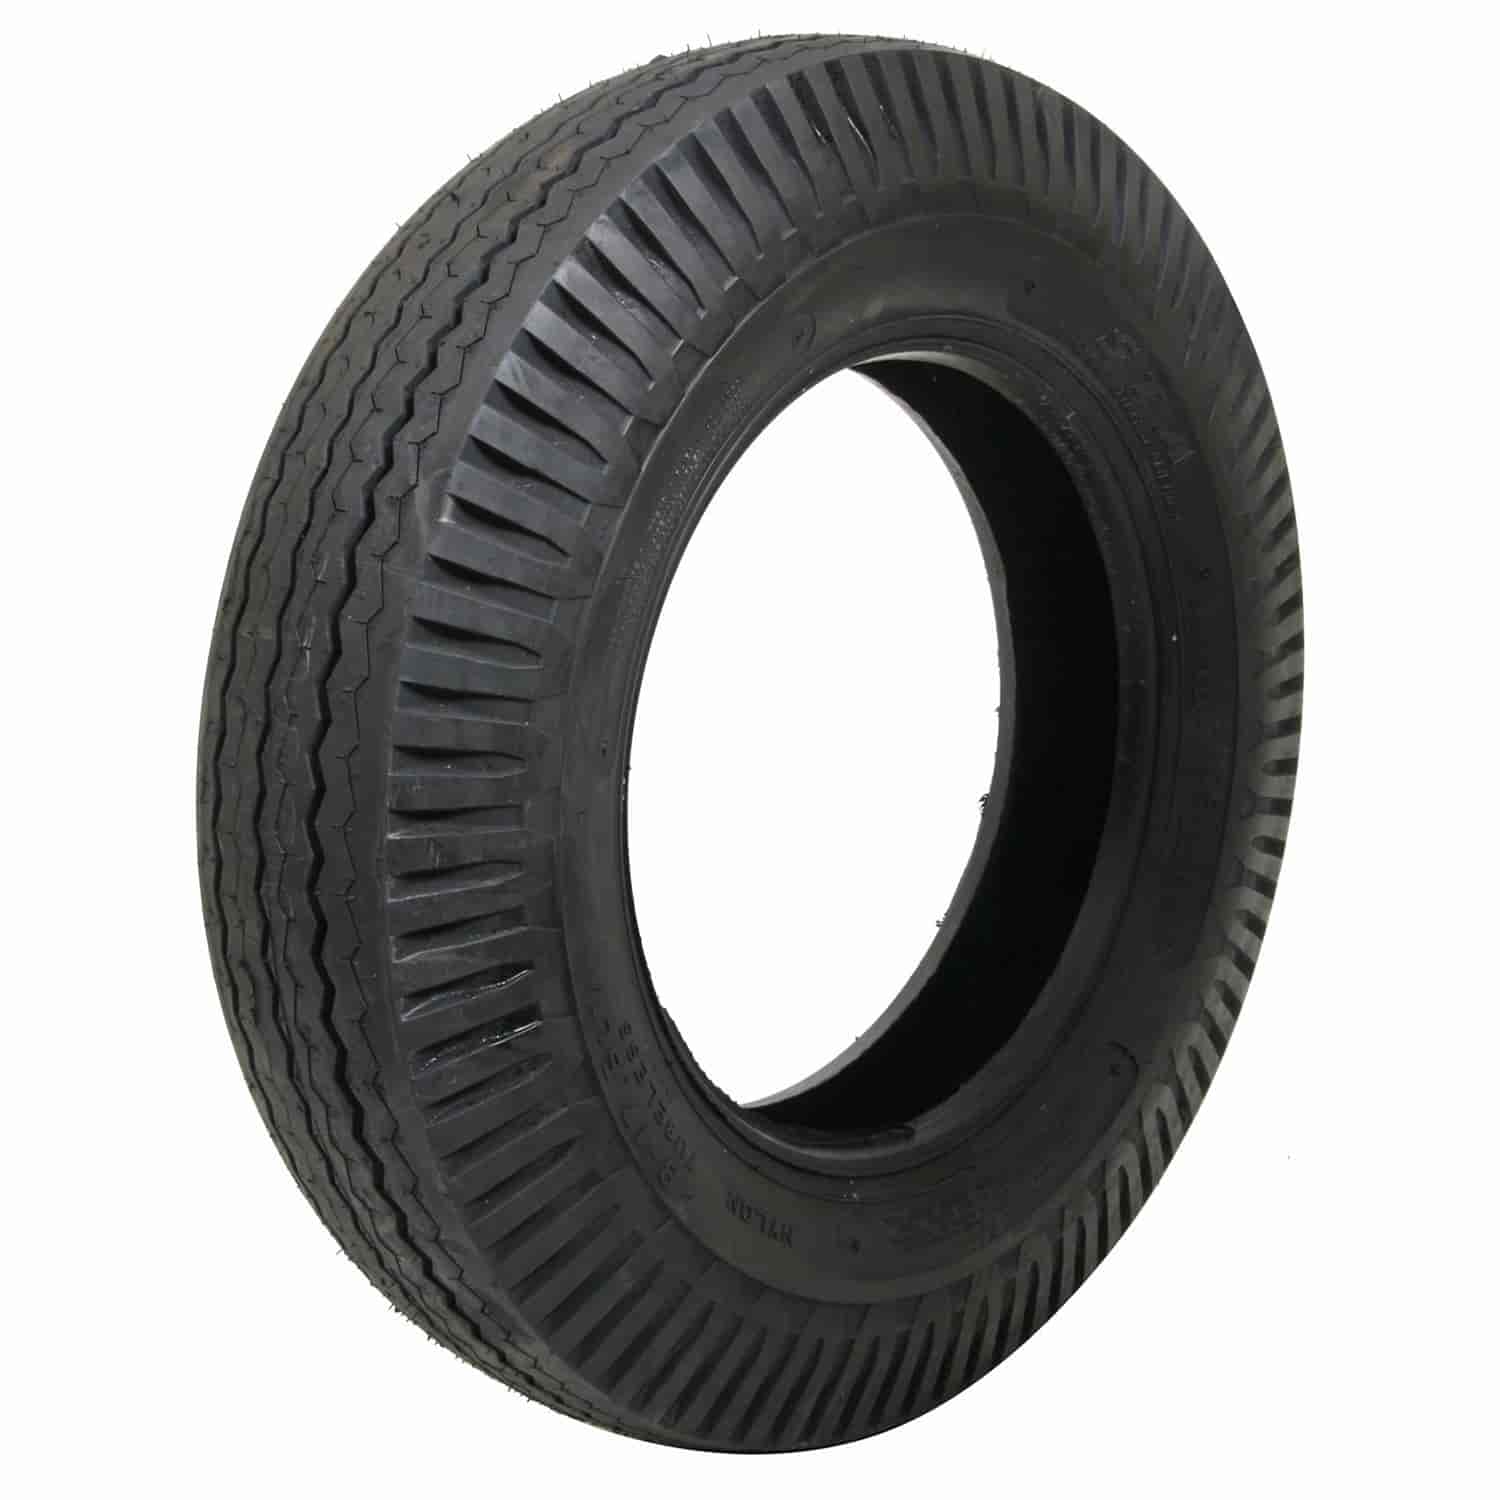 609027 STA Transport Highway Tire Size: 800-17.5